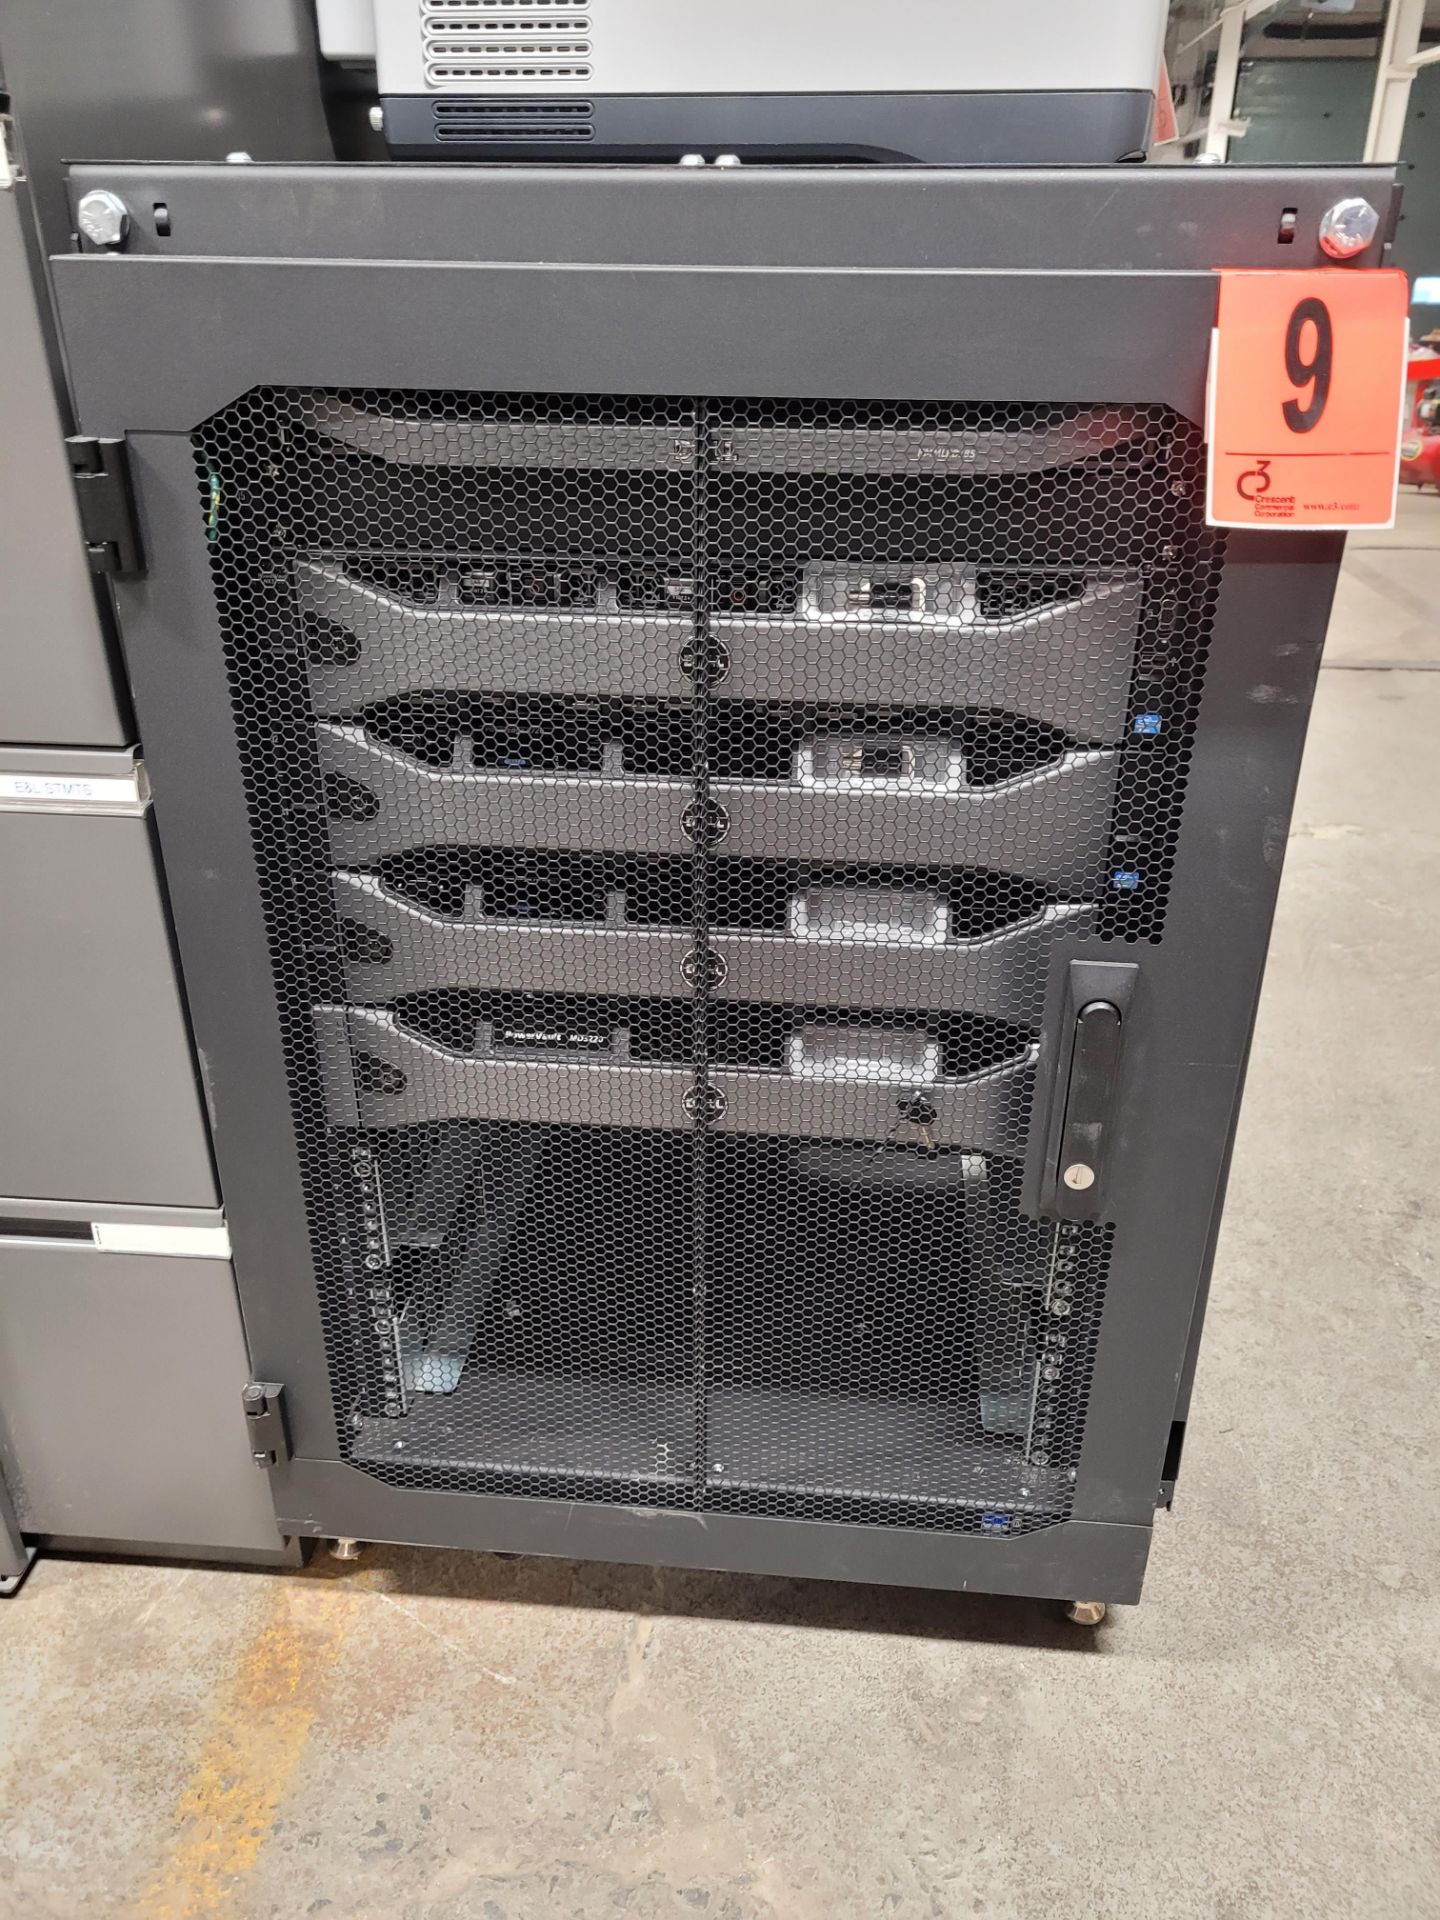 DELL PowerVault Server with Integrated DELL mod. KMMLED185 laptop display, housed in RACK SOLUTIONS - Image 2 of 23